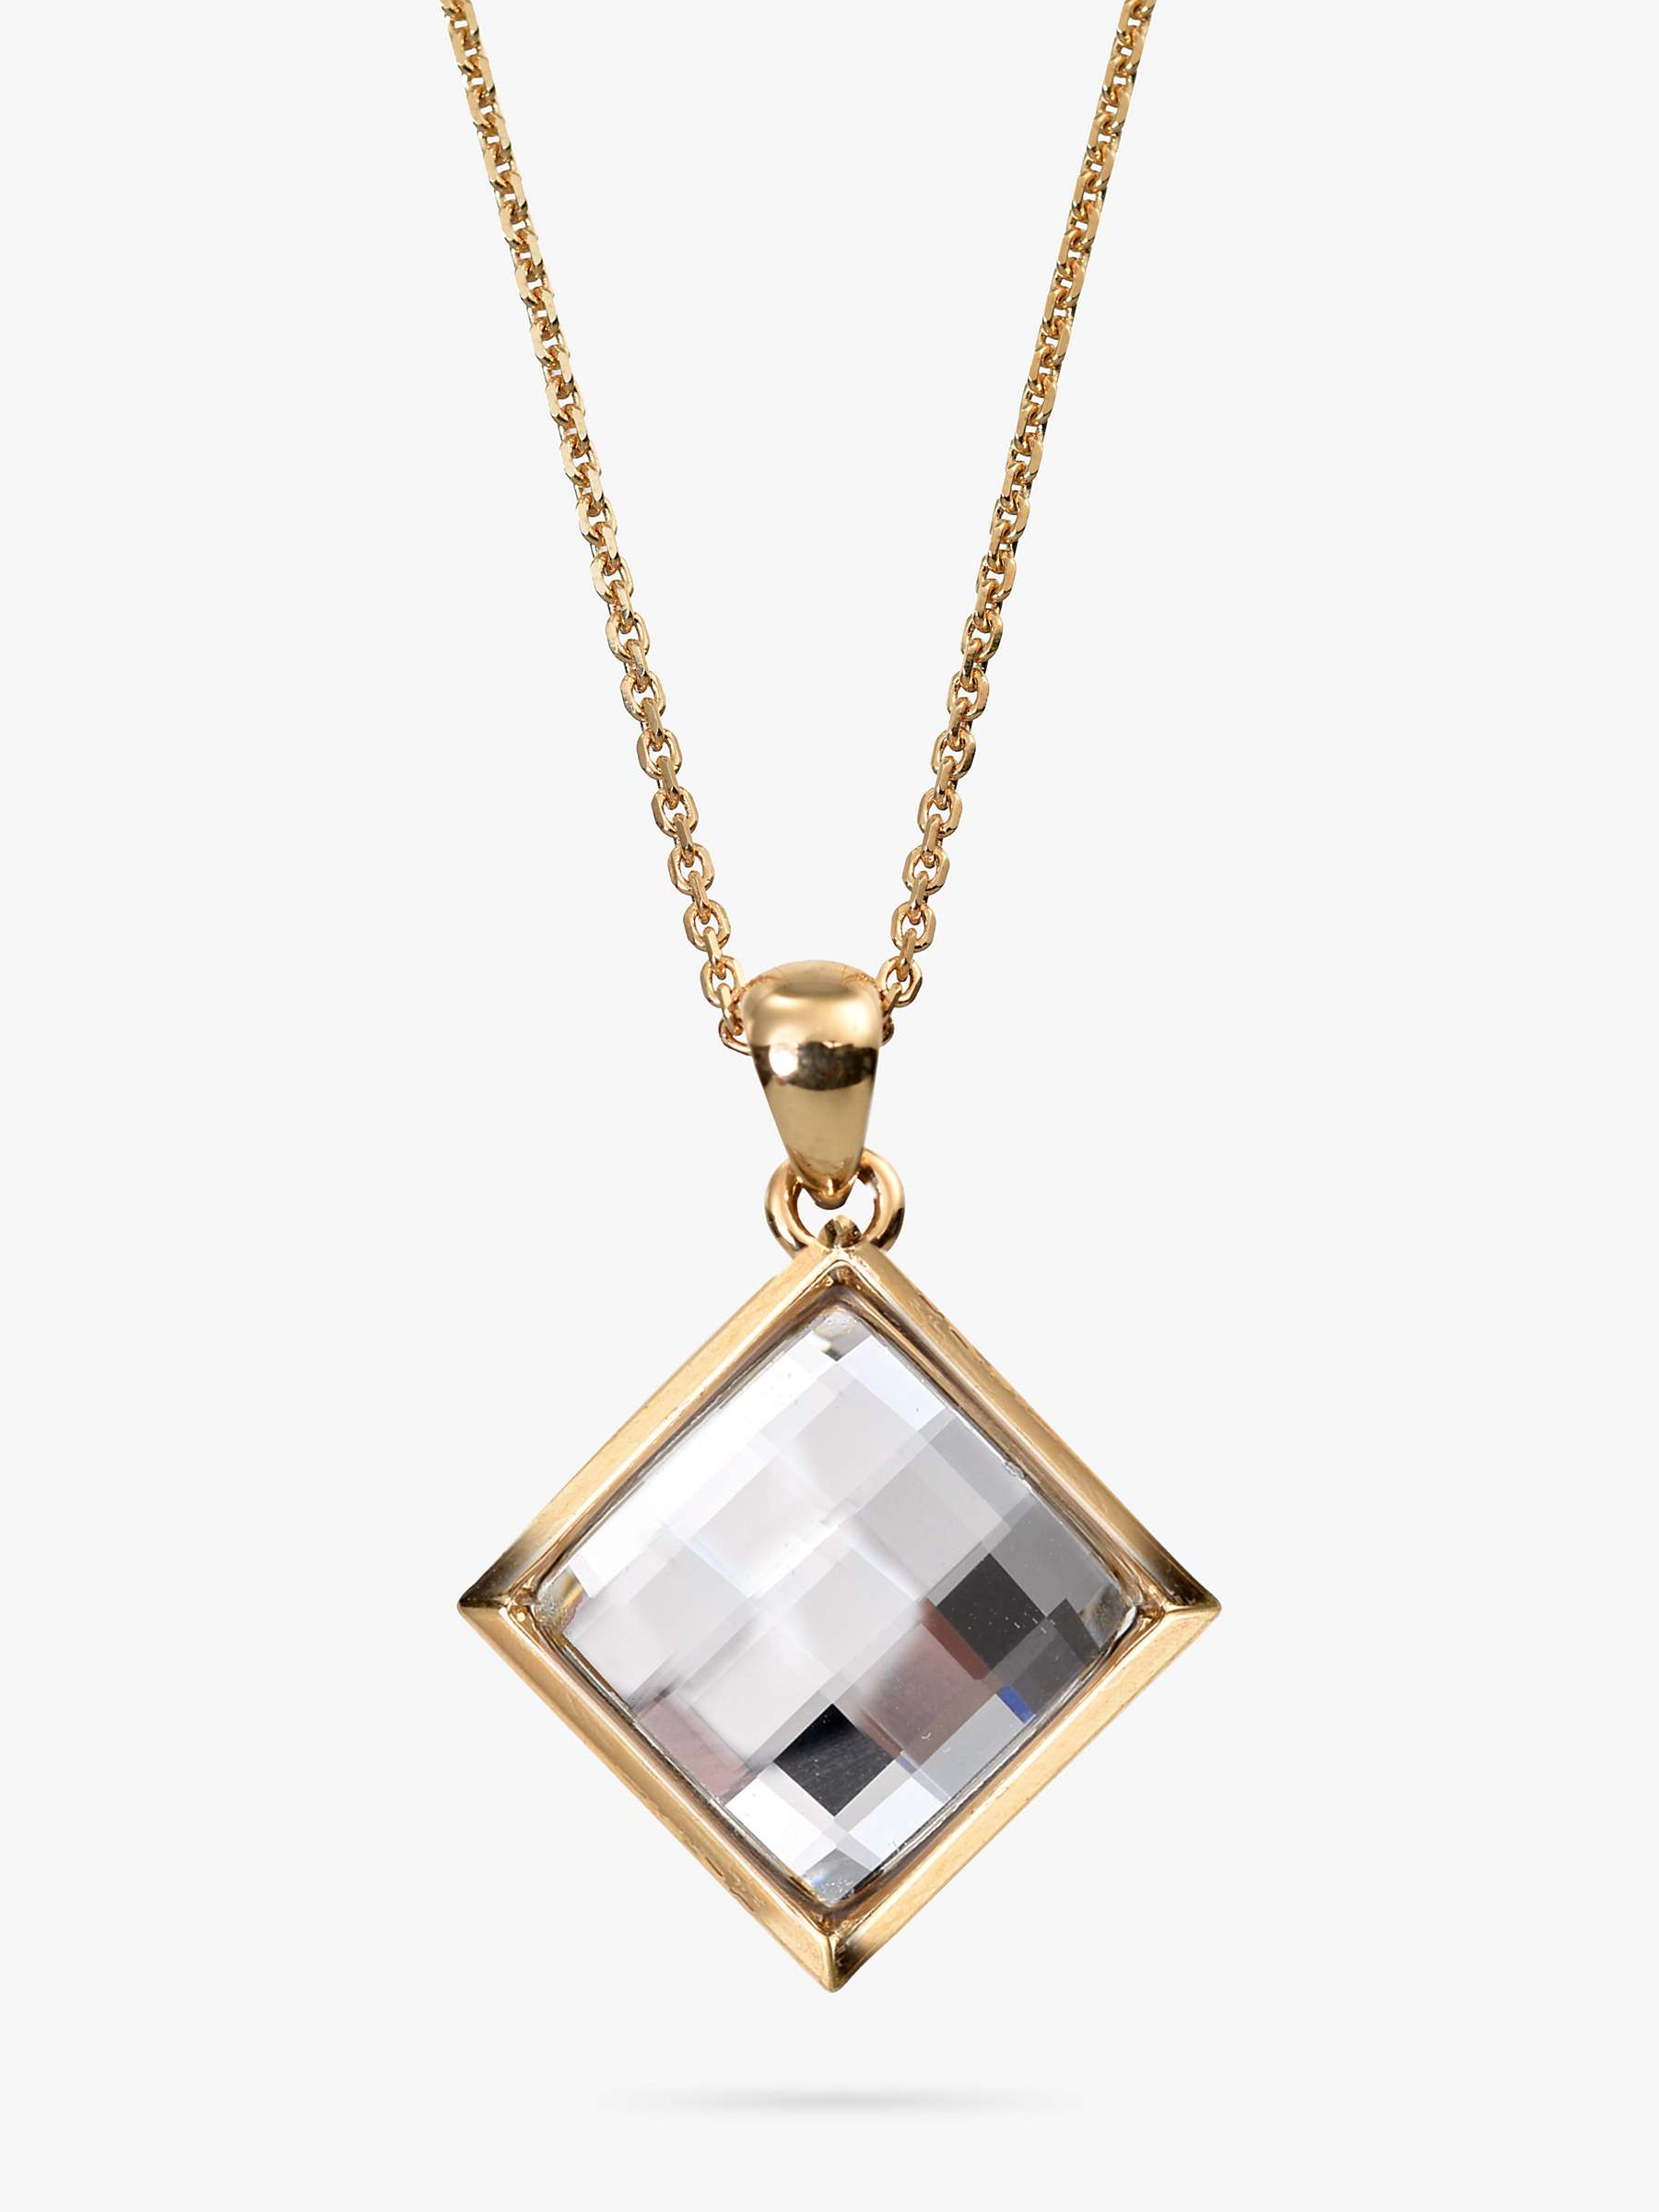 Buy Eclectica Vintage 18ct Gold Plated Mirrored Pendant Necklace, Dated Circa 1990s, Gold Online at johnlewis.com